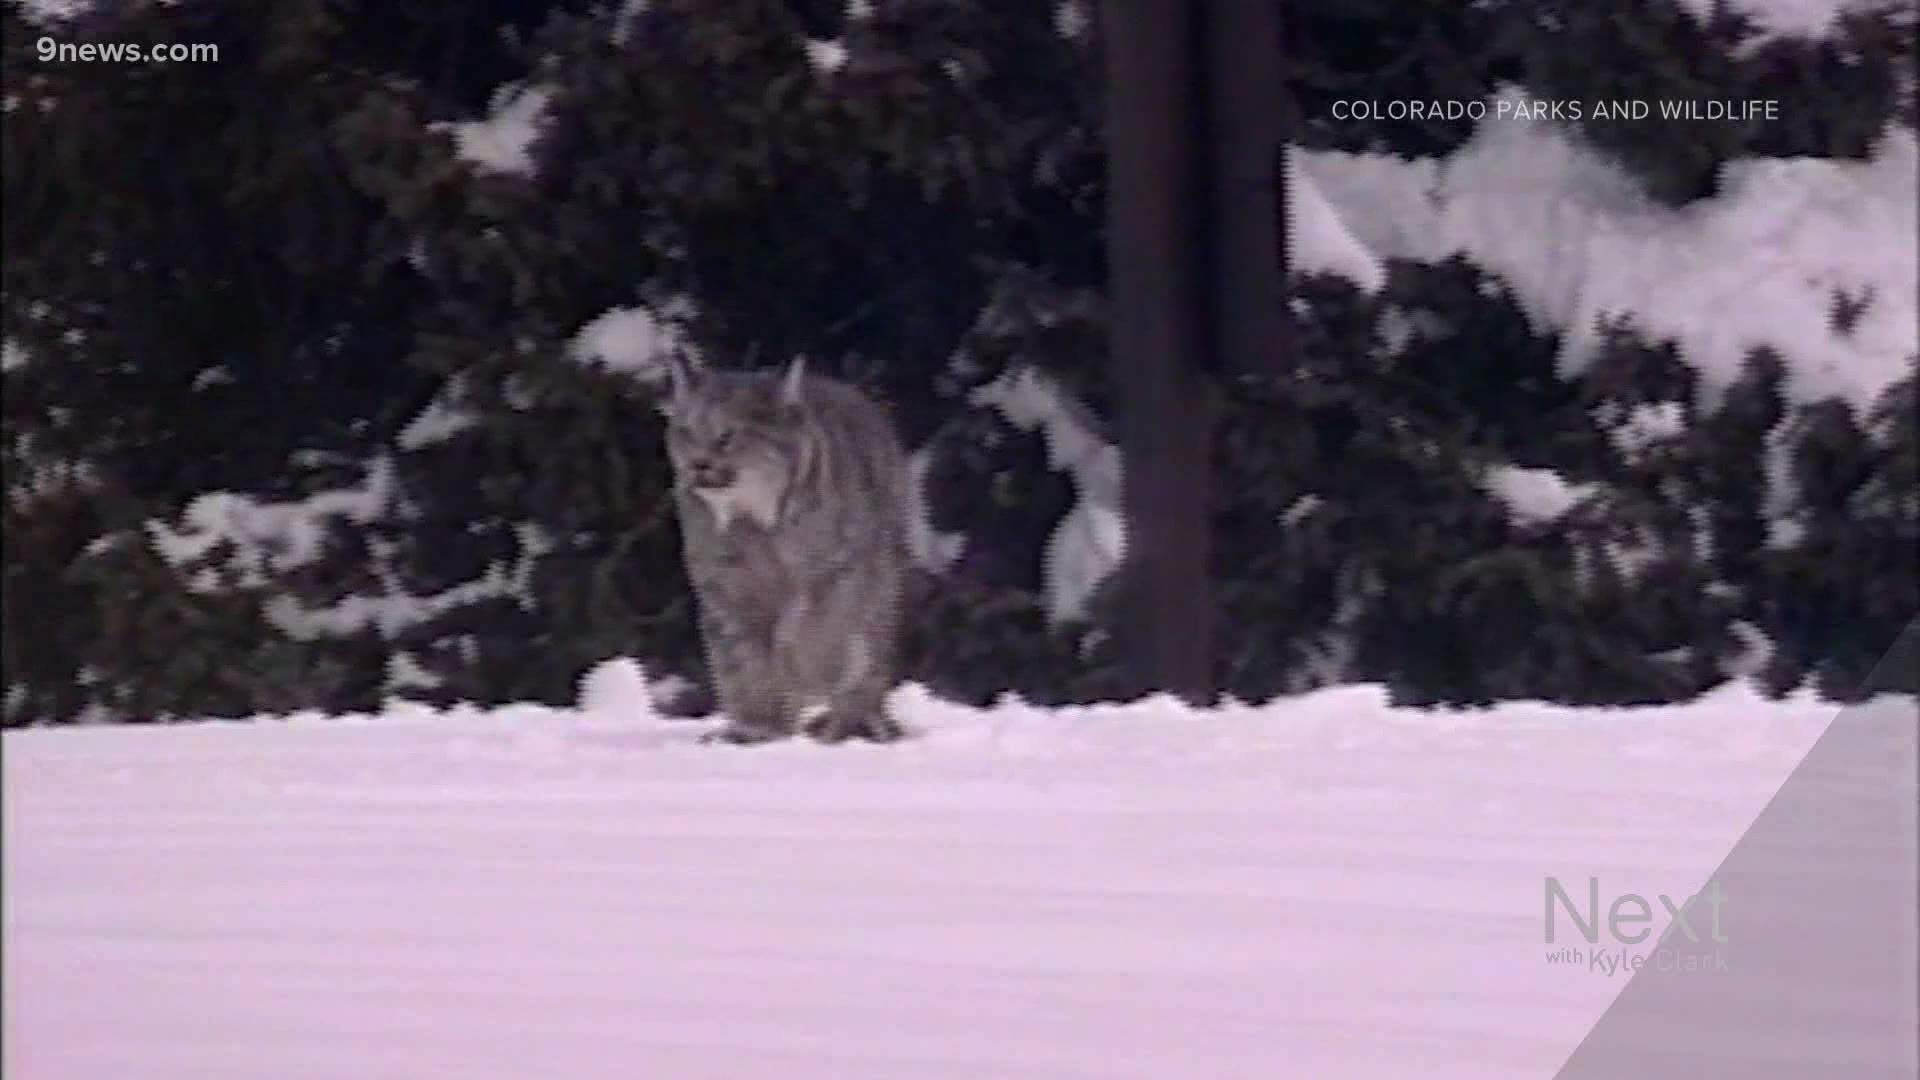 Voters in Colorado decided in 2020 to reintroduce wolves. Twenty years ago, Colorado was doing this with lynx. Wildlife officials have tracked their growth since.